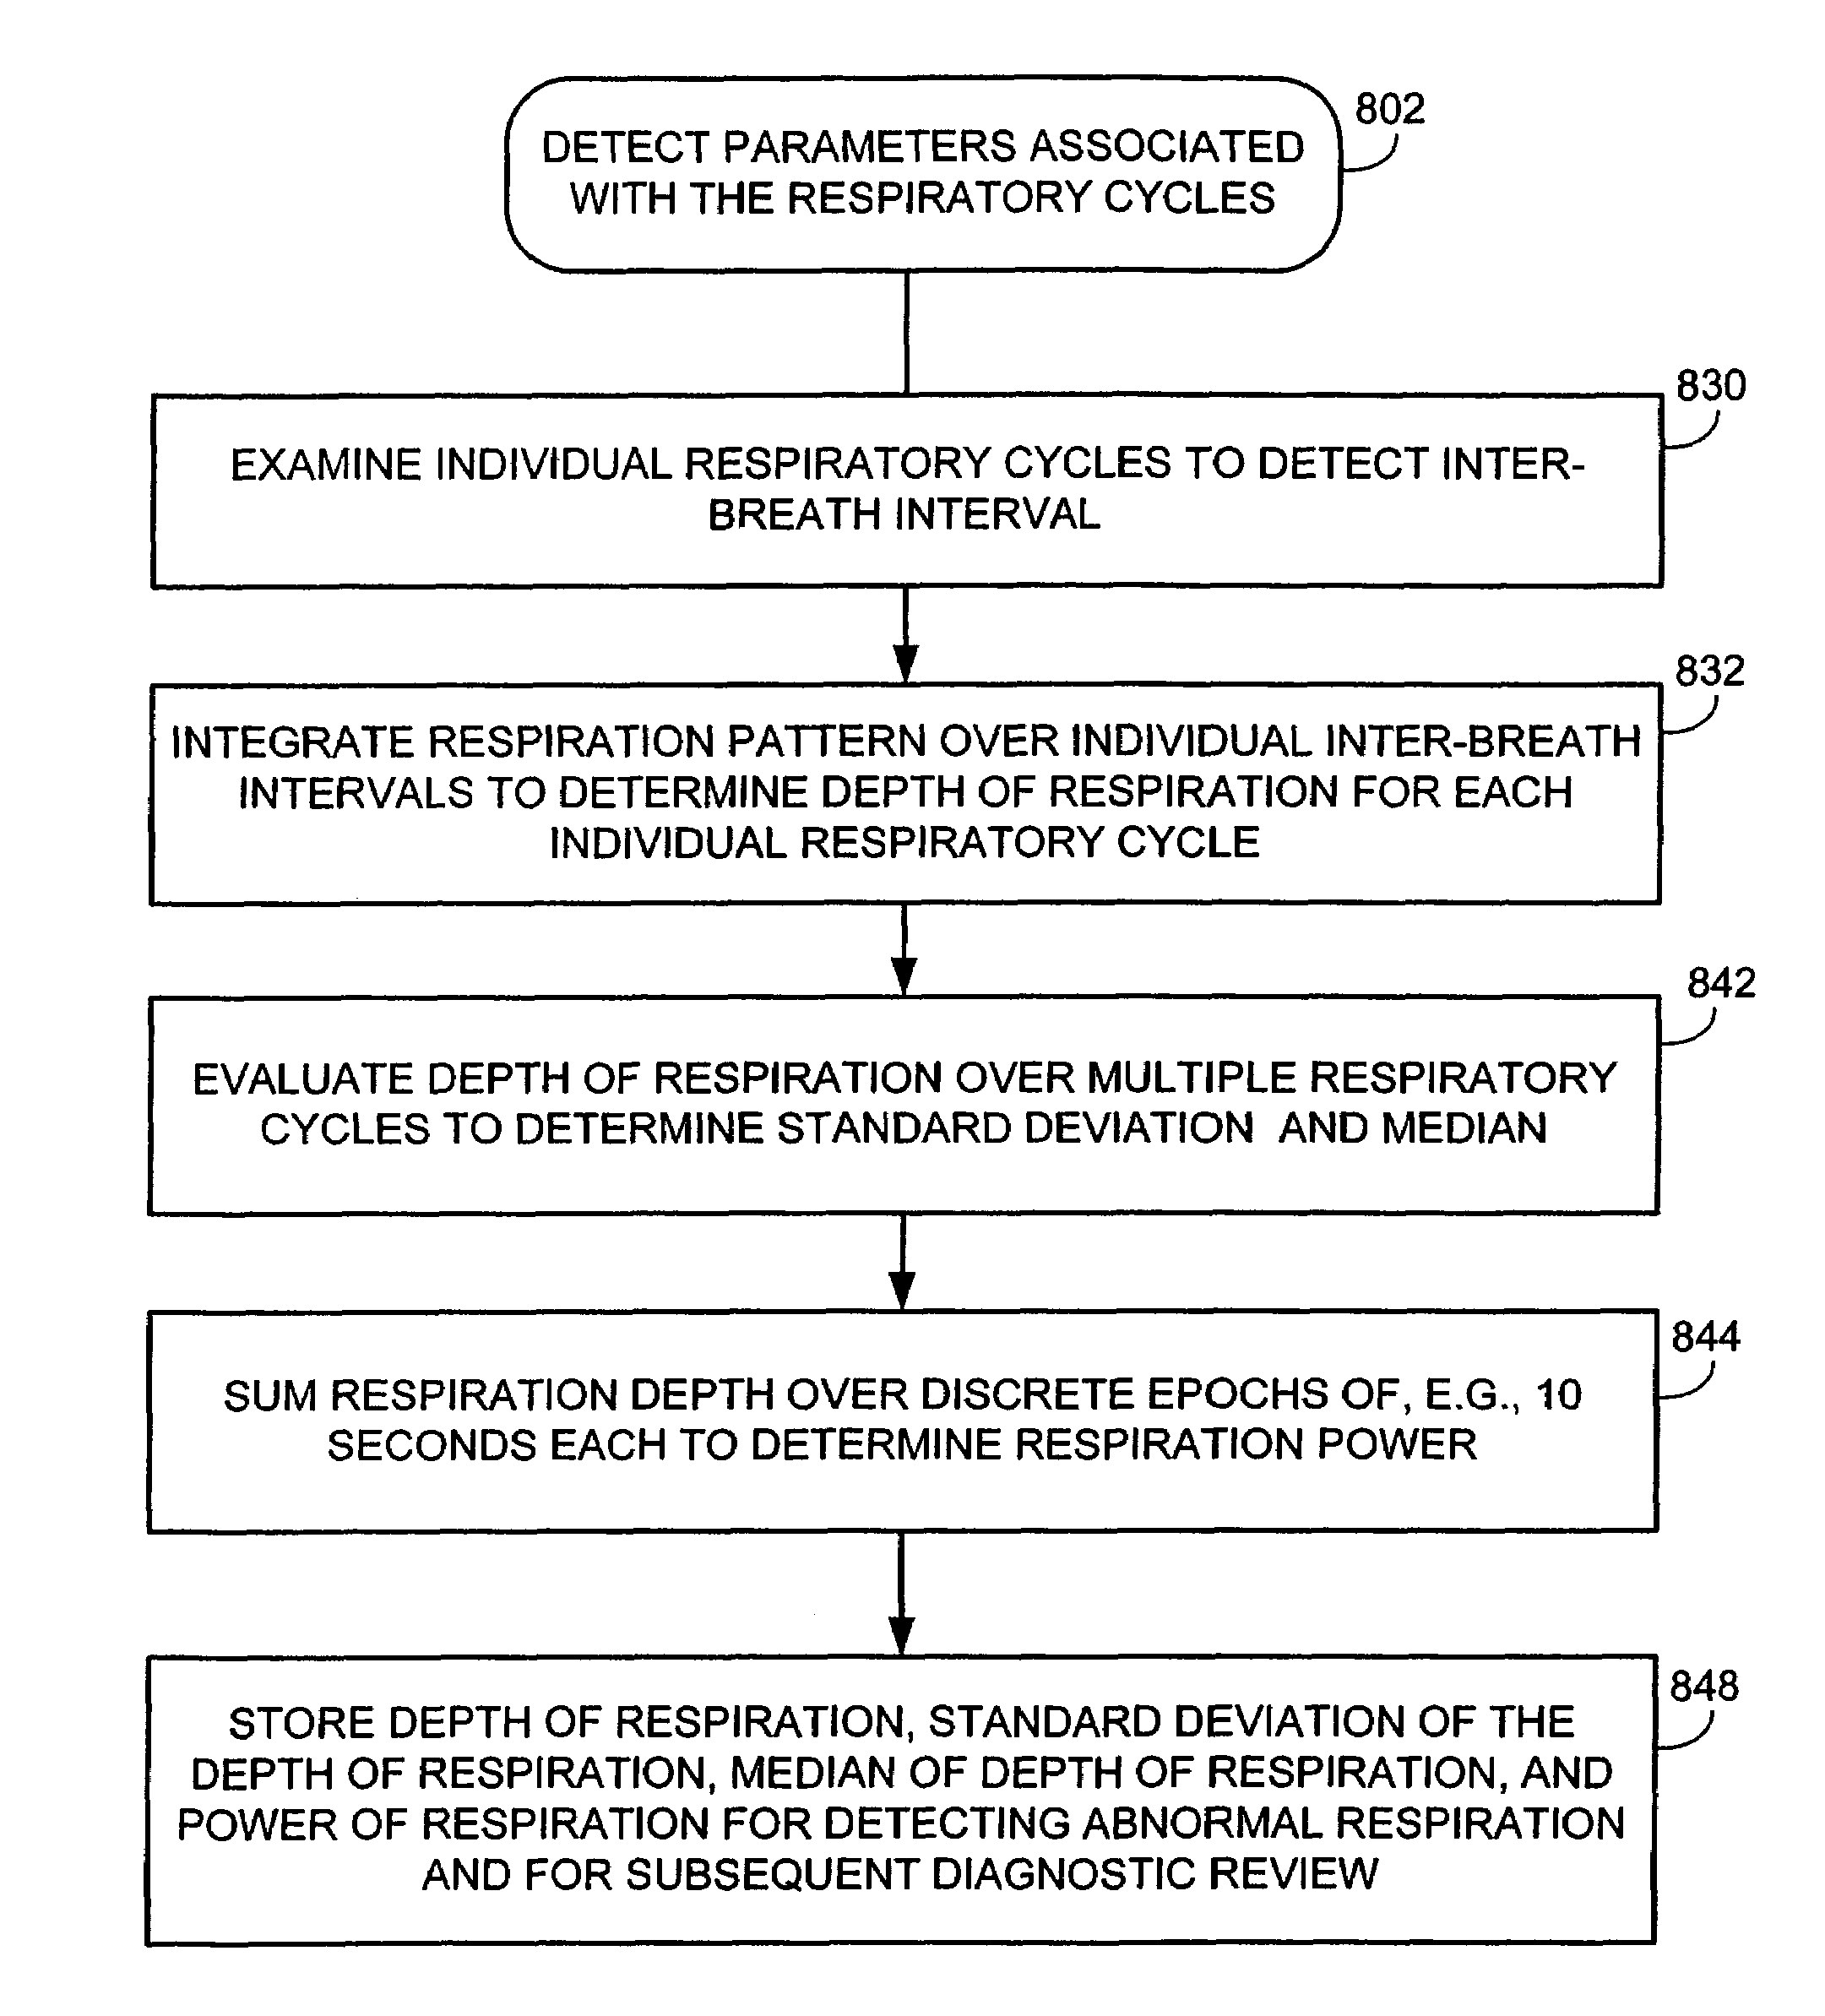 System and method for detecting abnormal respiration via respiratory parameters derived from intracardiac electrogram signals